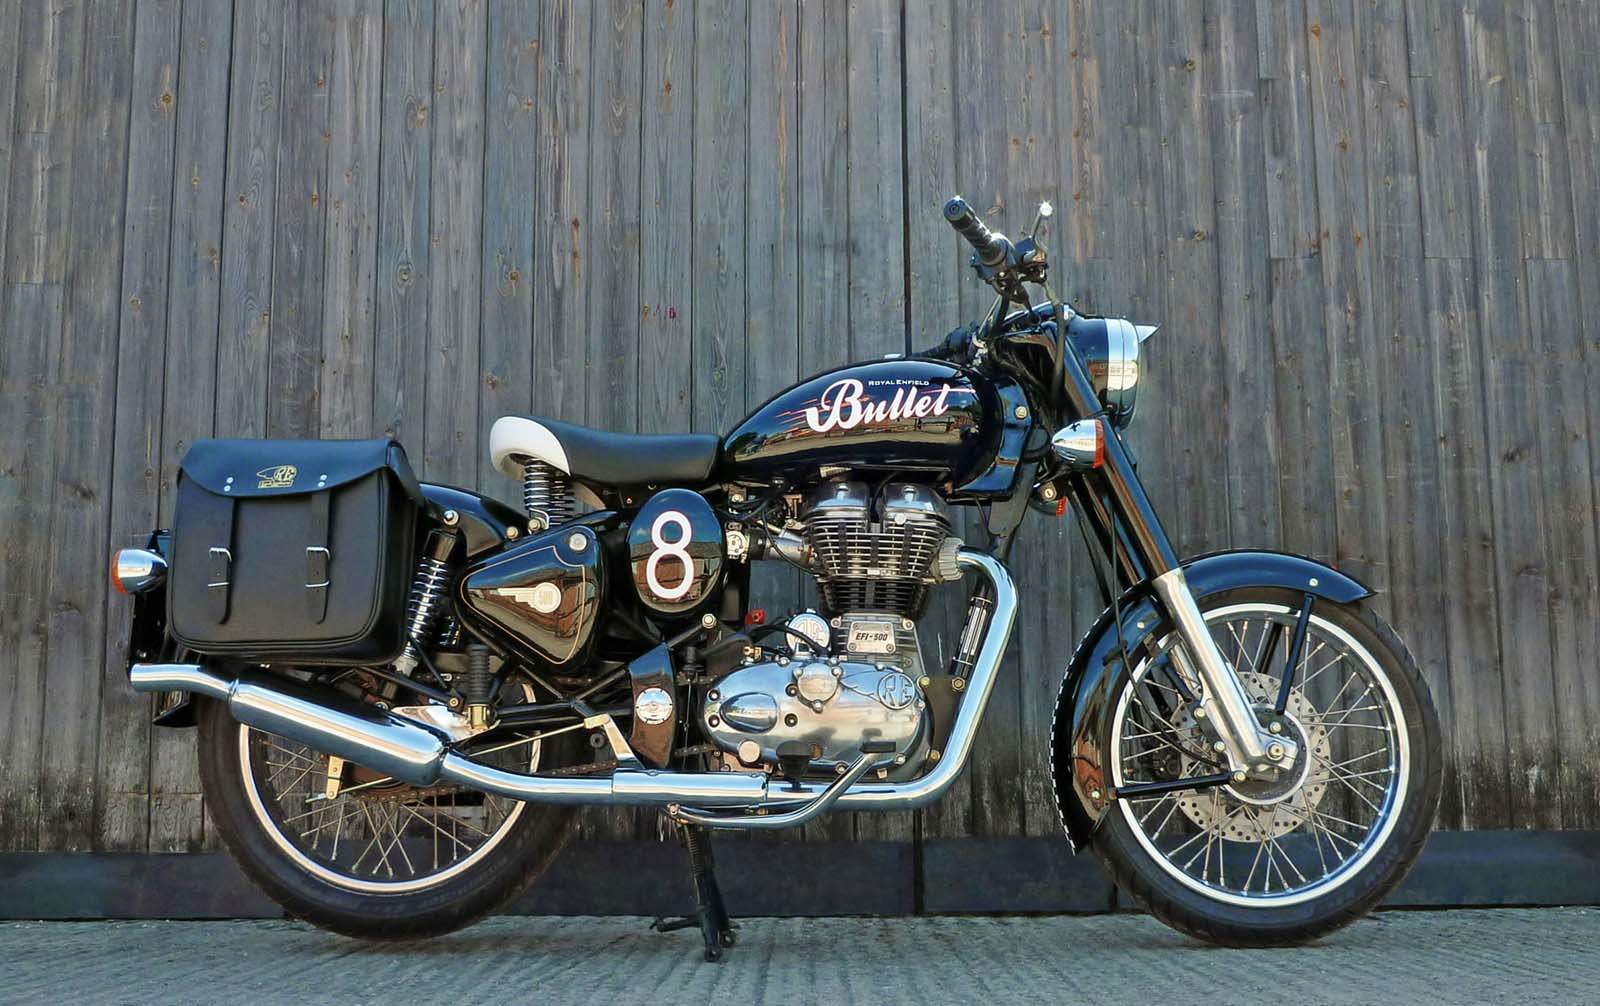 Royal Enfield Bullet 500 technical specifications